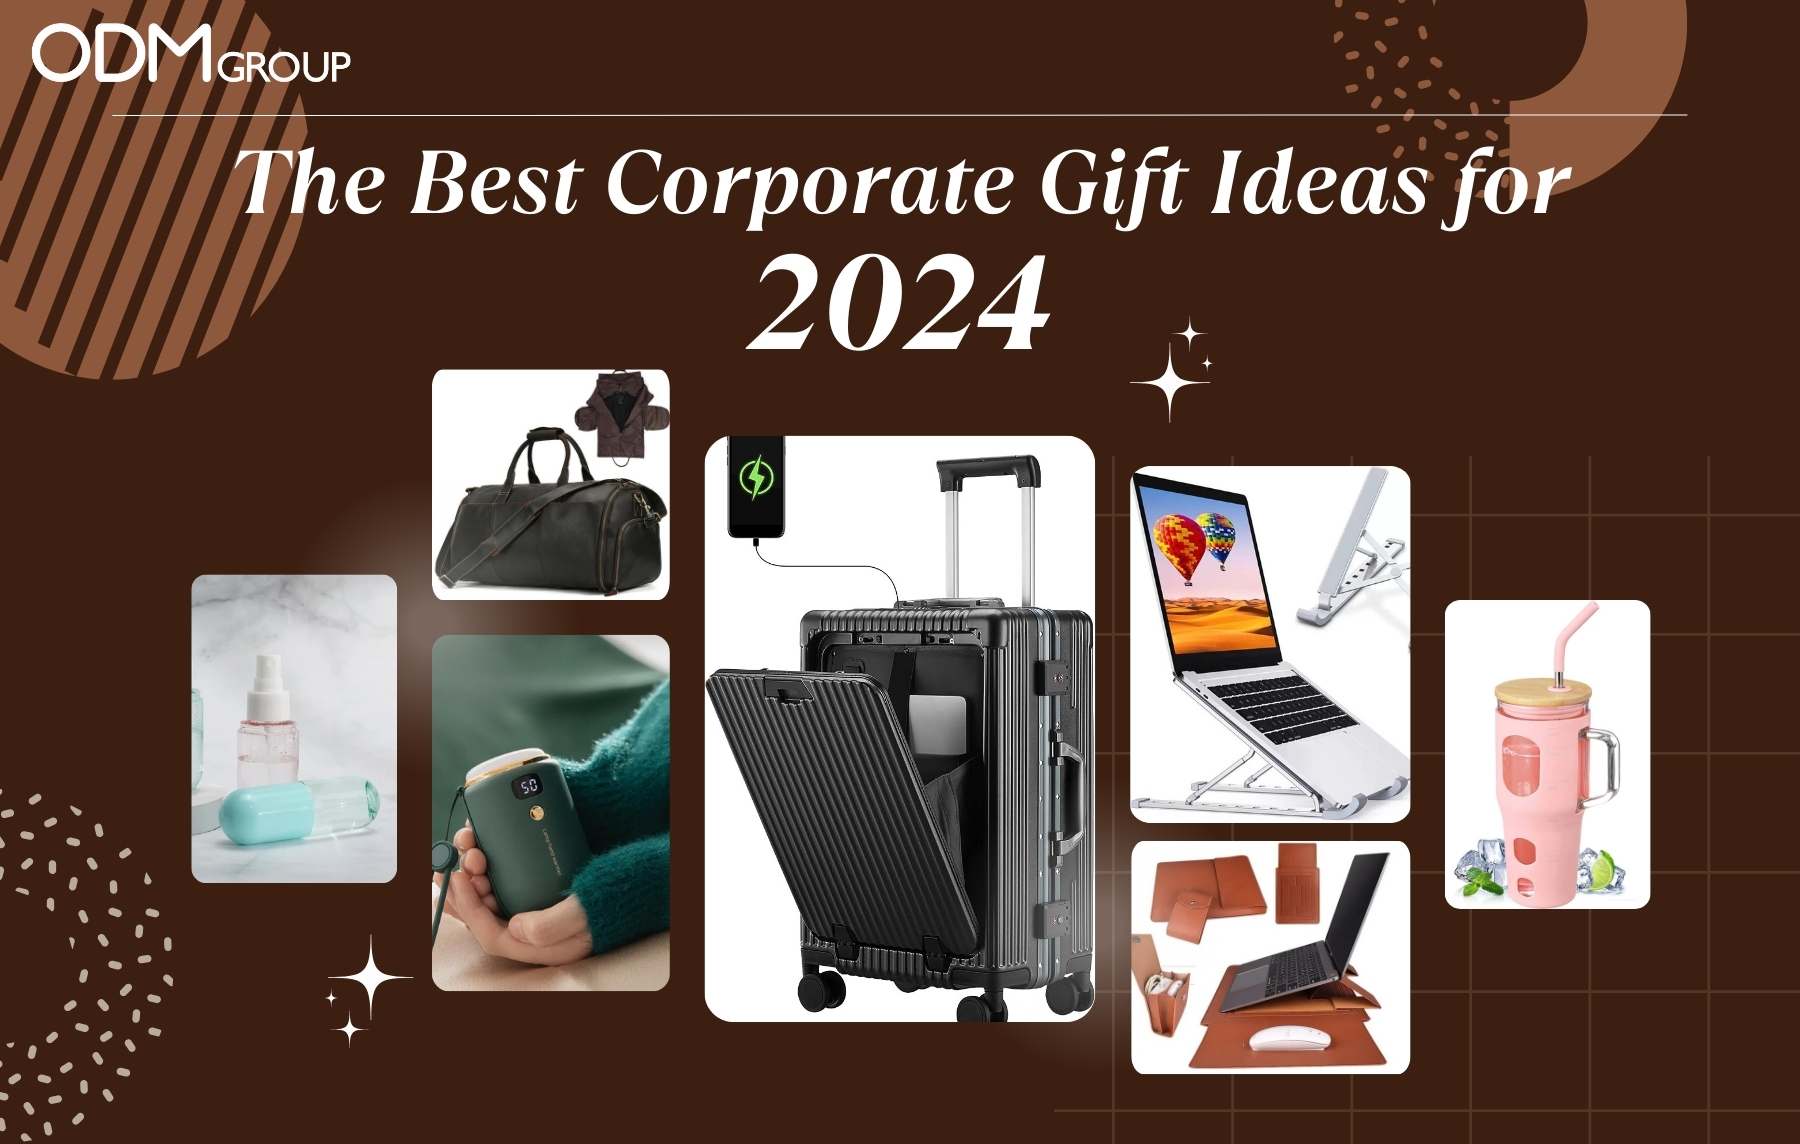 Various corporate gift ideas for 2024 including a travel bag, laptop stand, and reusable water bottle.